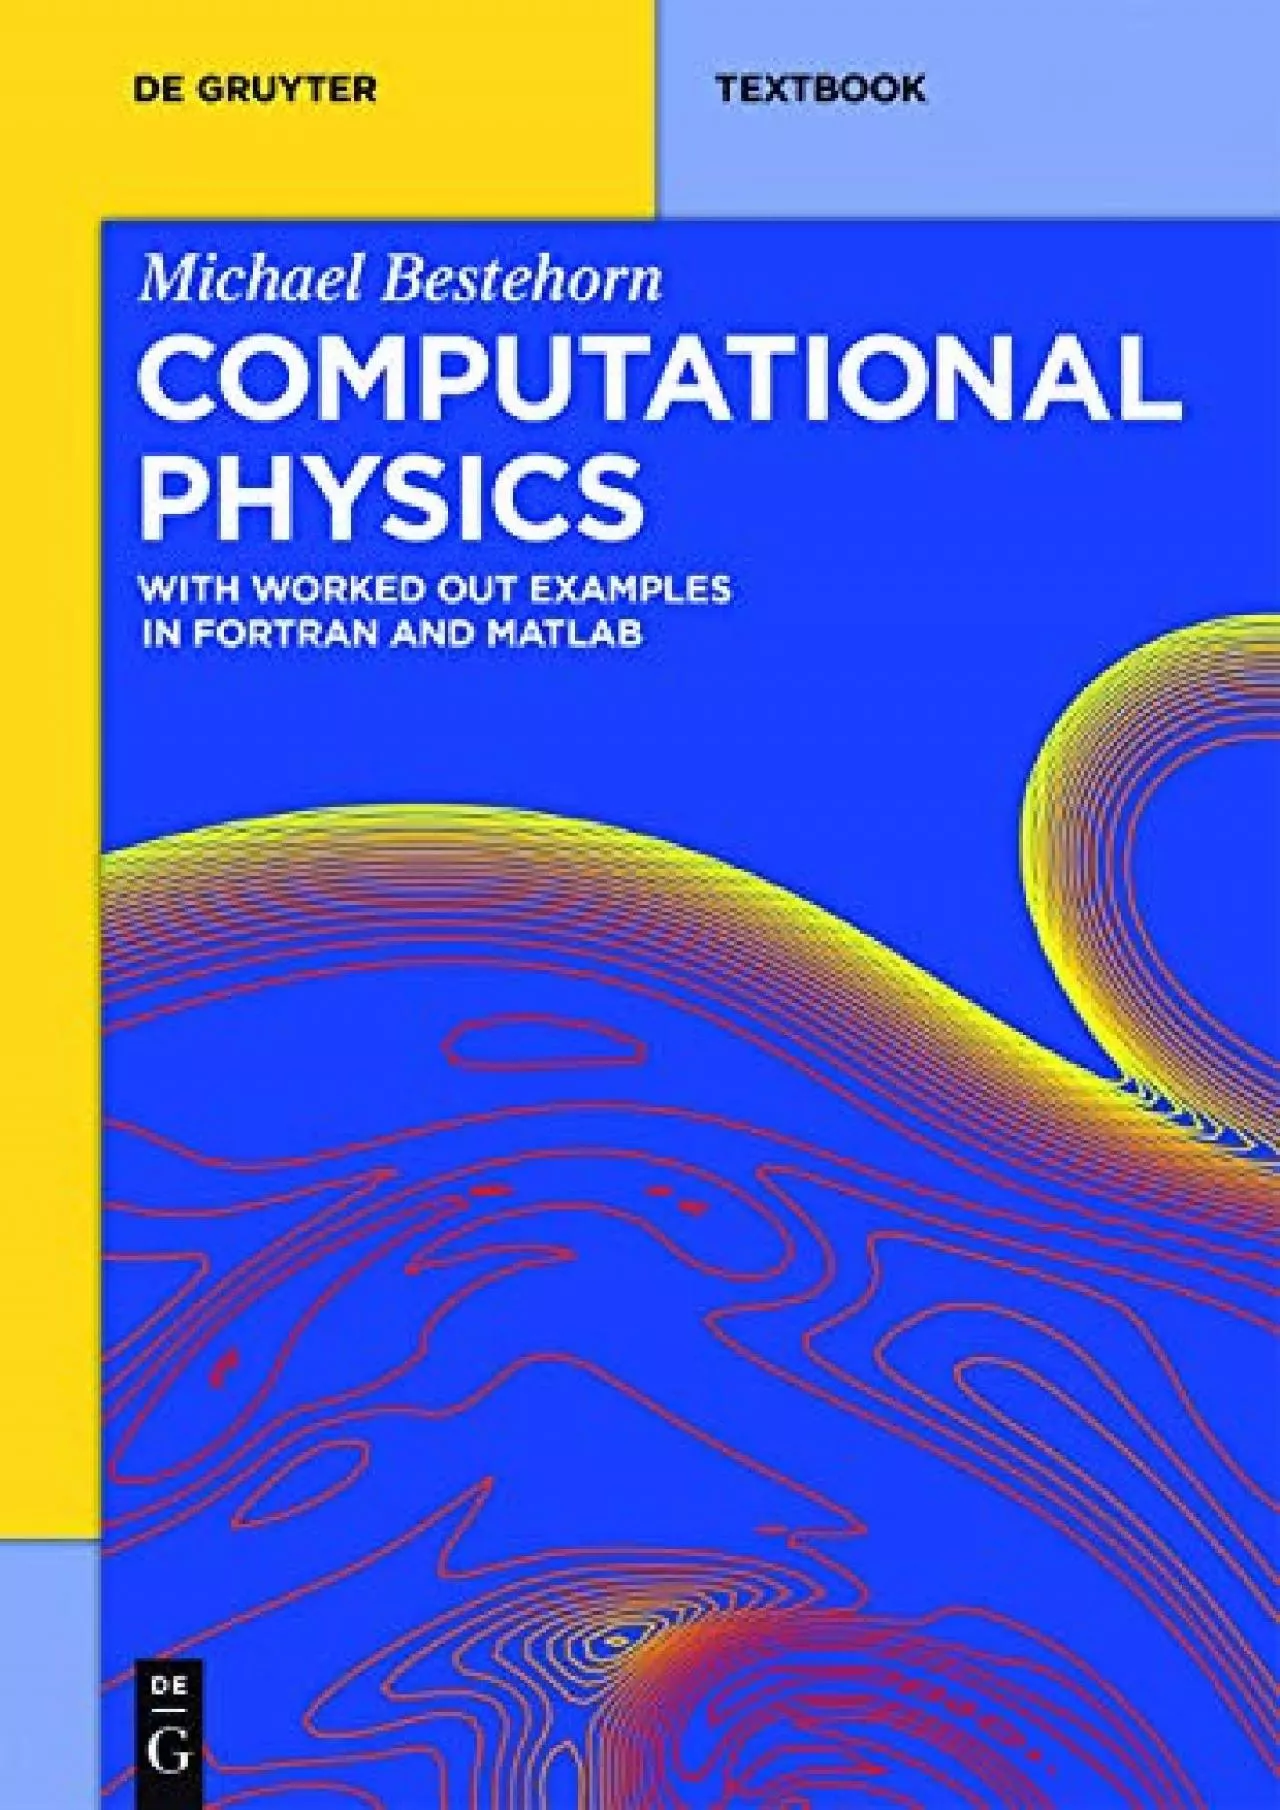 [READ]-Computational Physics: With Worked Out Examples in FORTRAN and MATLAB (De Gruyter